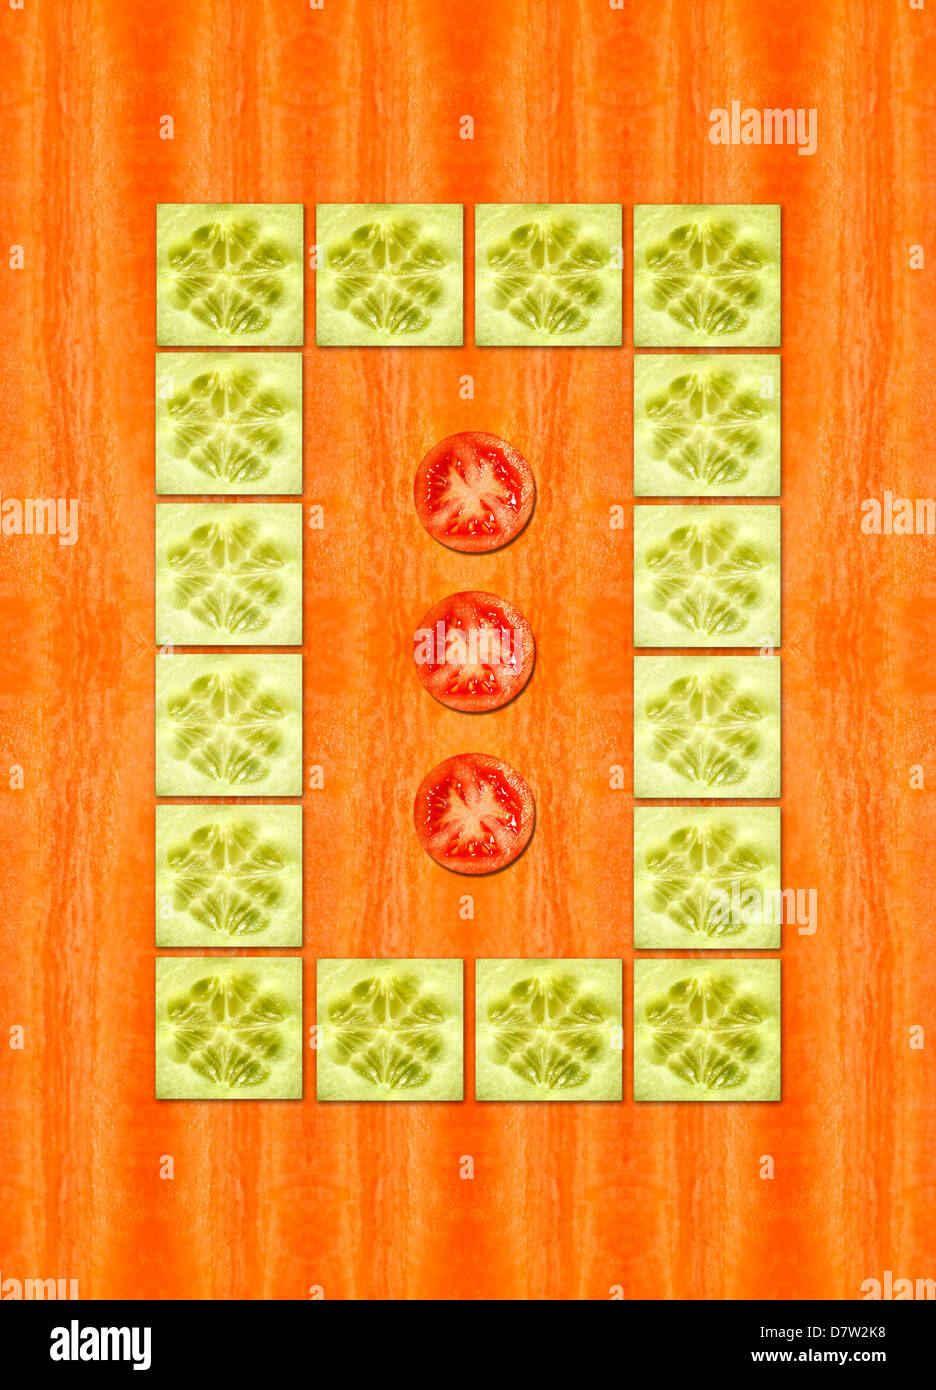 Green tile pattern with tomatoes. Stock Photo